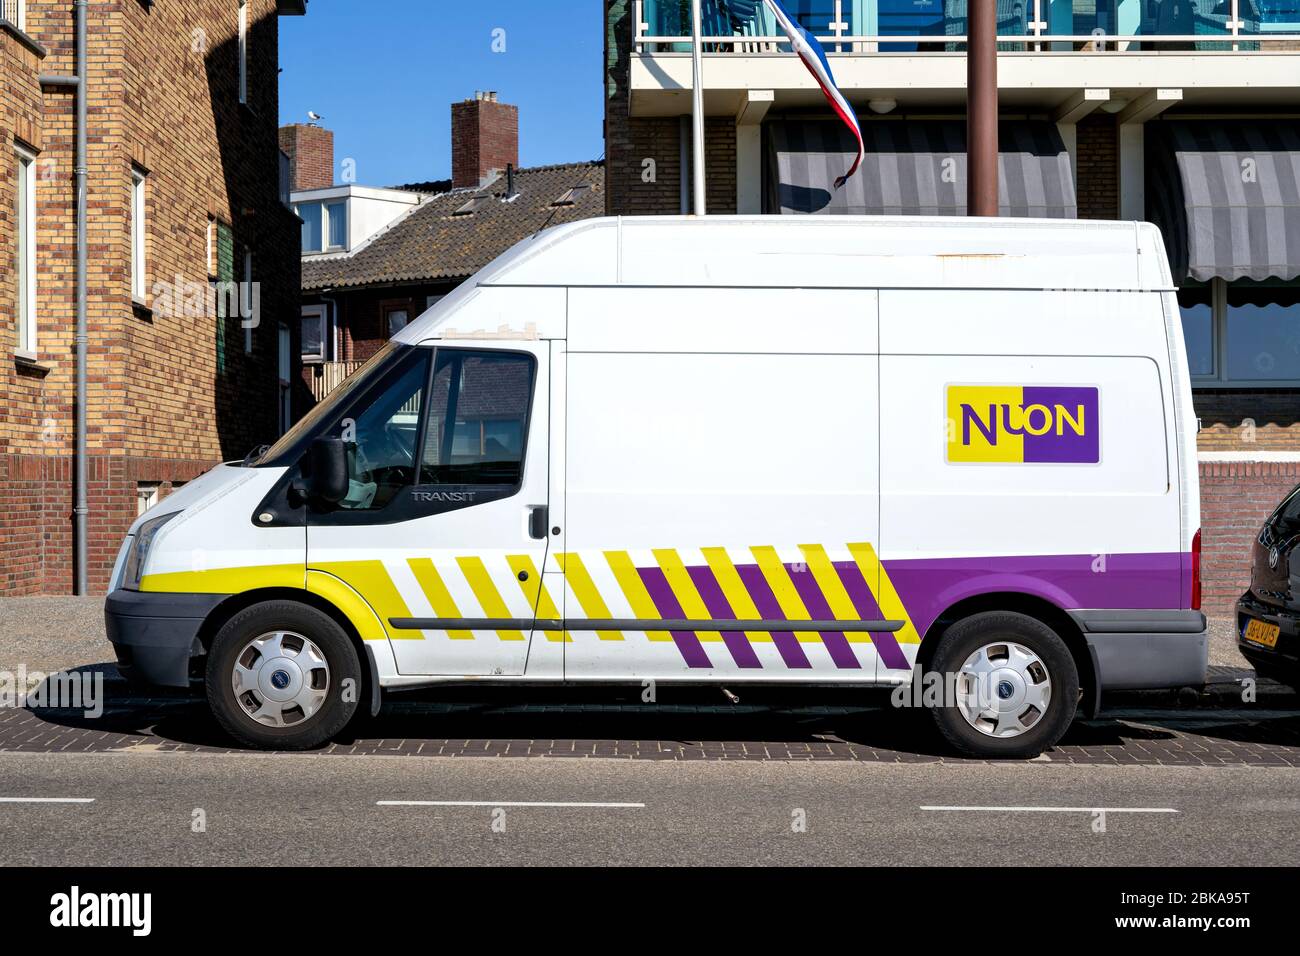 Ford Transit van of Nuon. Nuon Energy (now Vattenfall Nederland) is a utility company based in Amsterdam, The Netherlands. Stock Photo